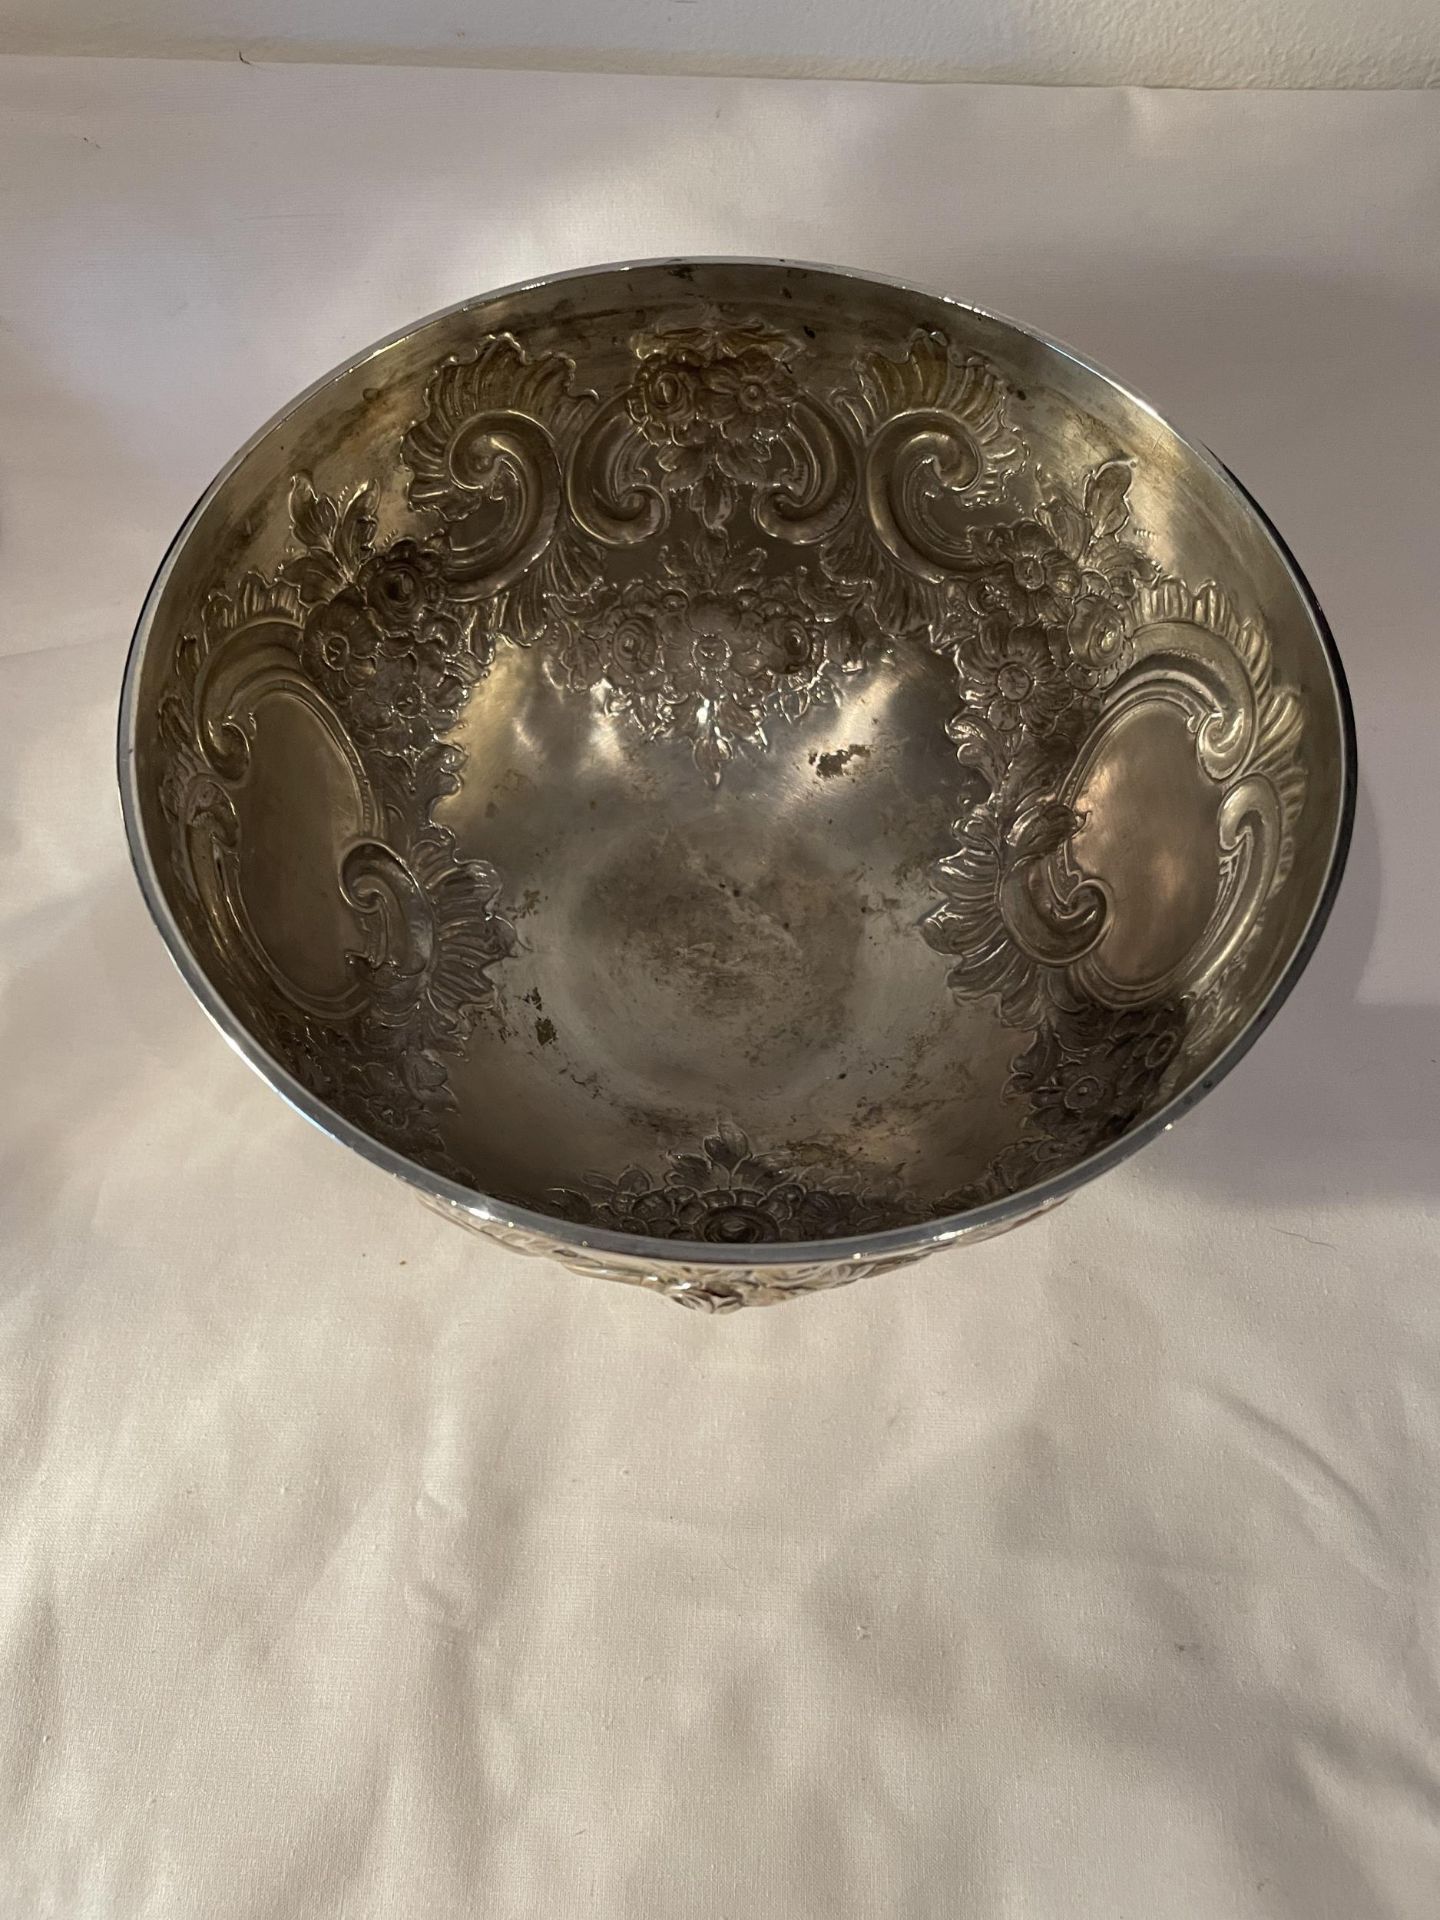 A 1901 HALLMARKED LONDON SILVER DECORATIVE FOOTED BOWL, INDISTINCT MAKER, GROSS WEIGHT 385 GRAMS - Image 9 of 15